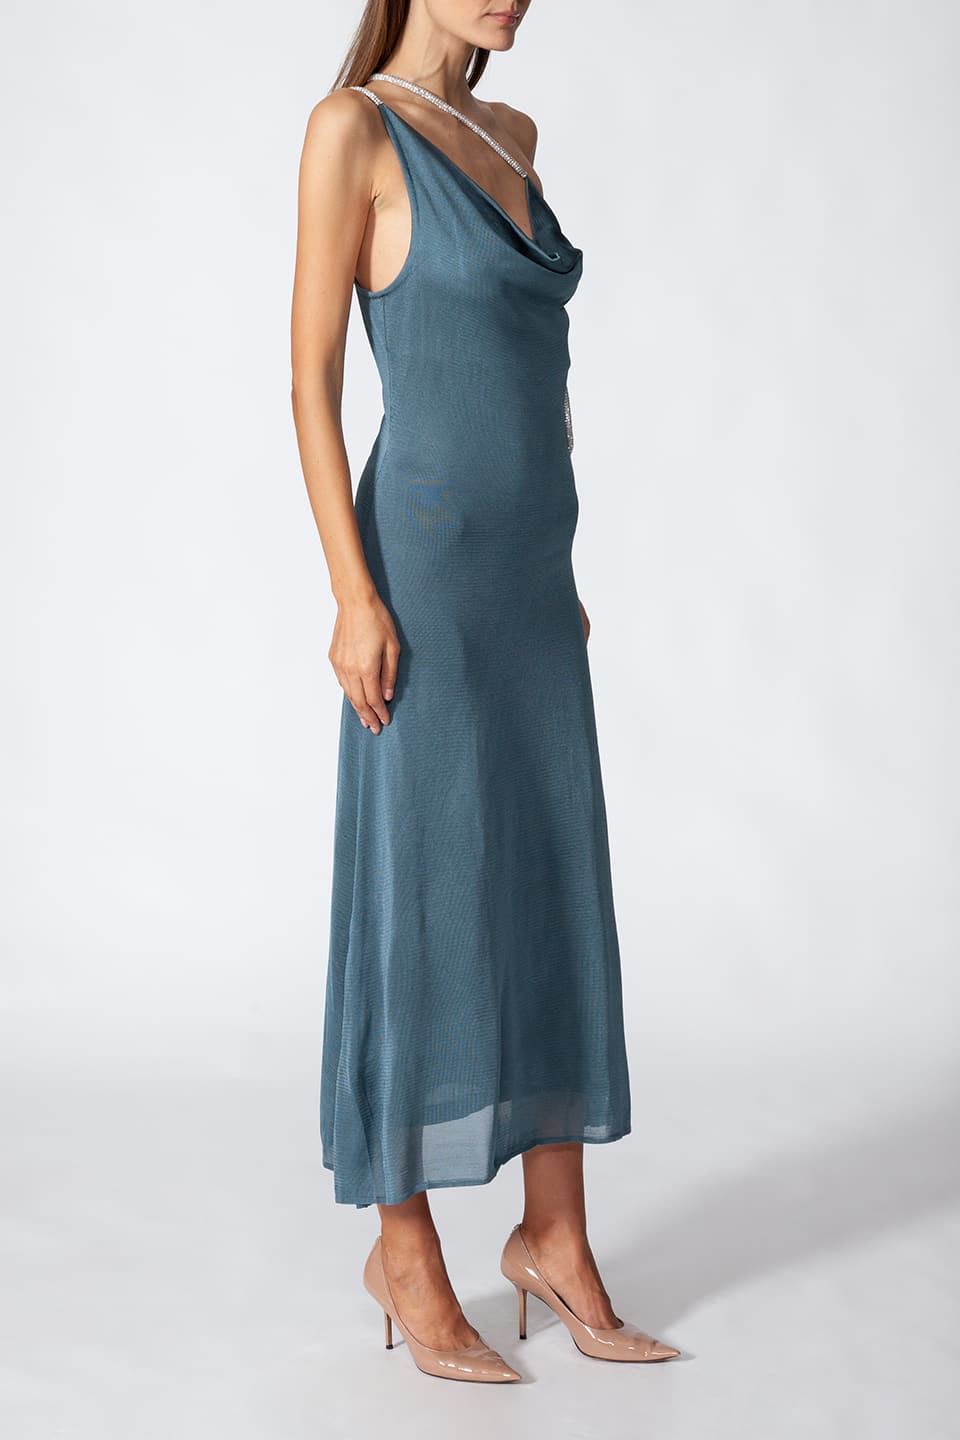 Model in pose from side view, while wearing midi length dress featuring cut out details in petrol blue color, from Kukhareva London fashion stylist